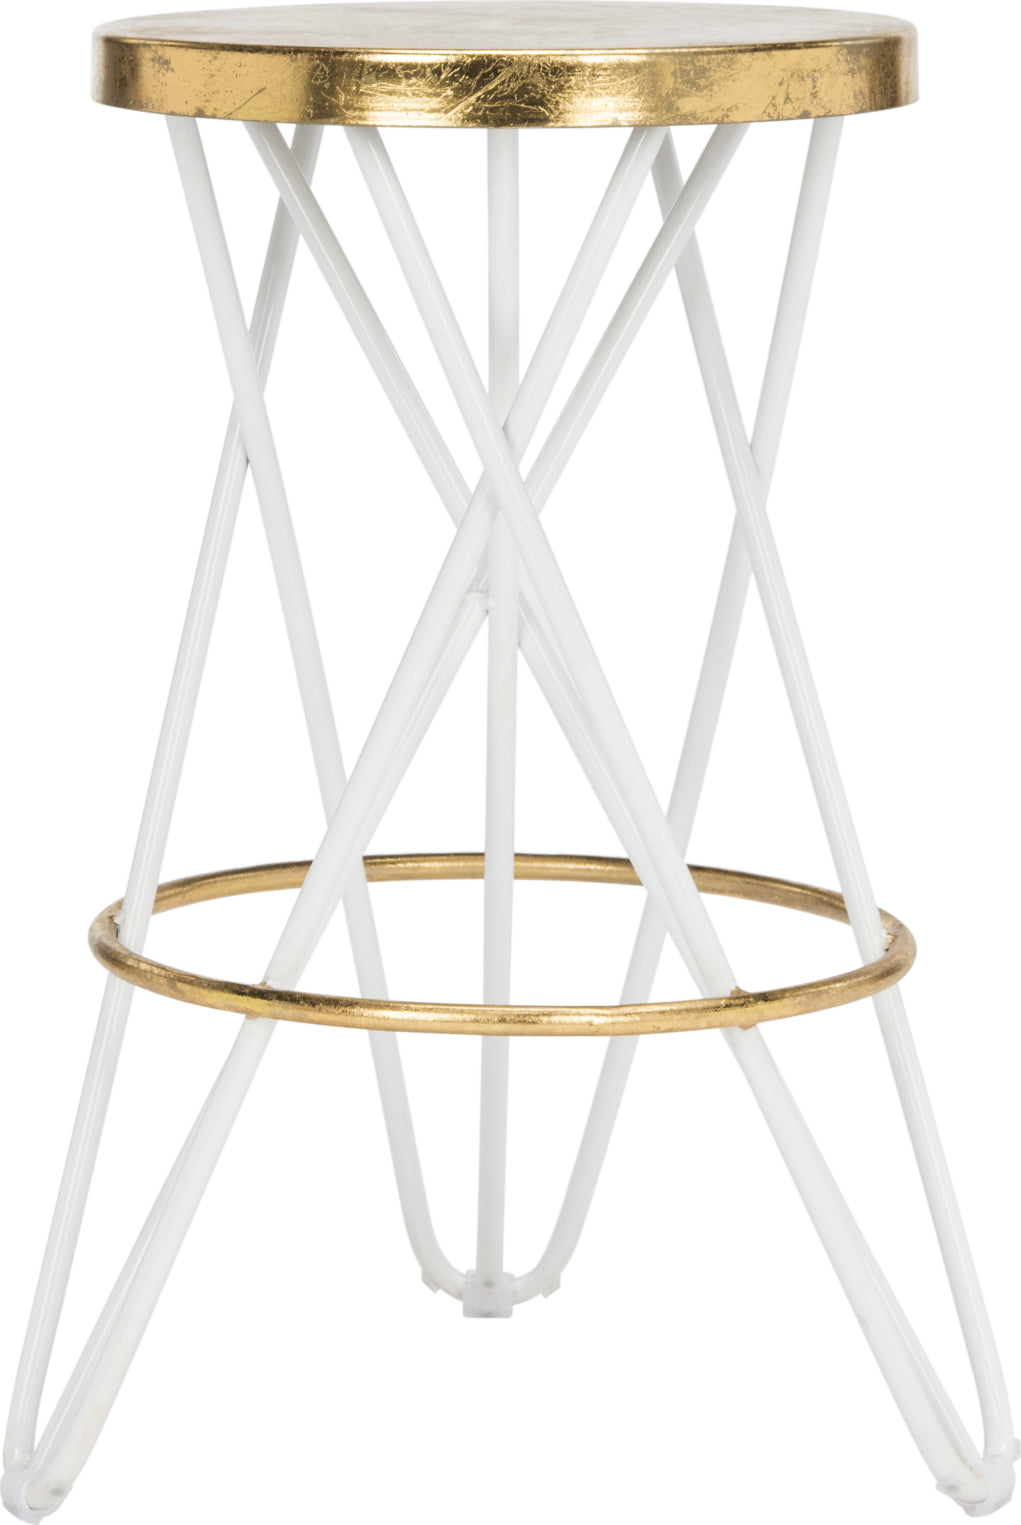 Safavieh Lorna Gold Leaf Counter Stool White and Furniture main image